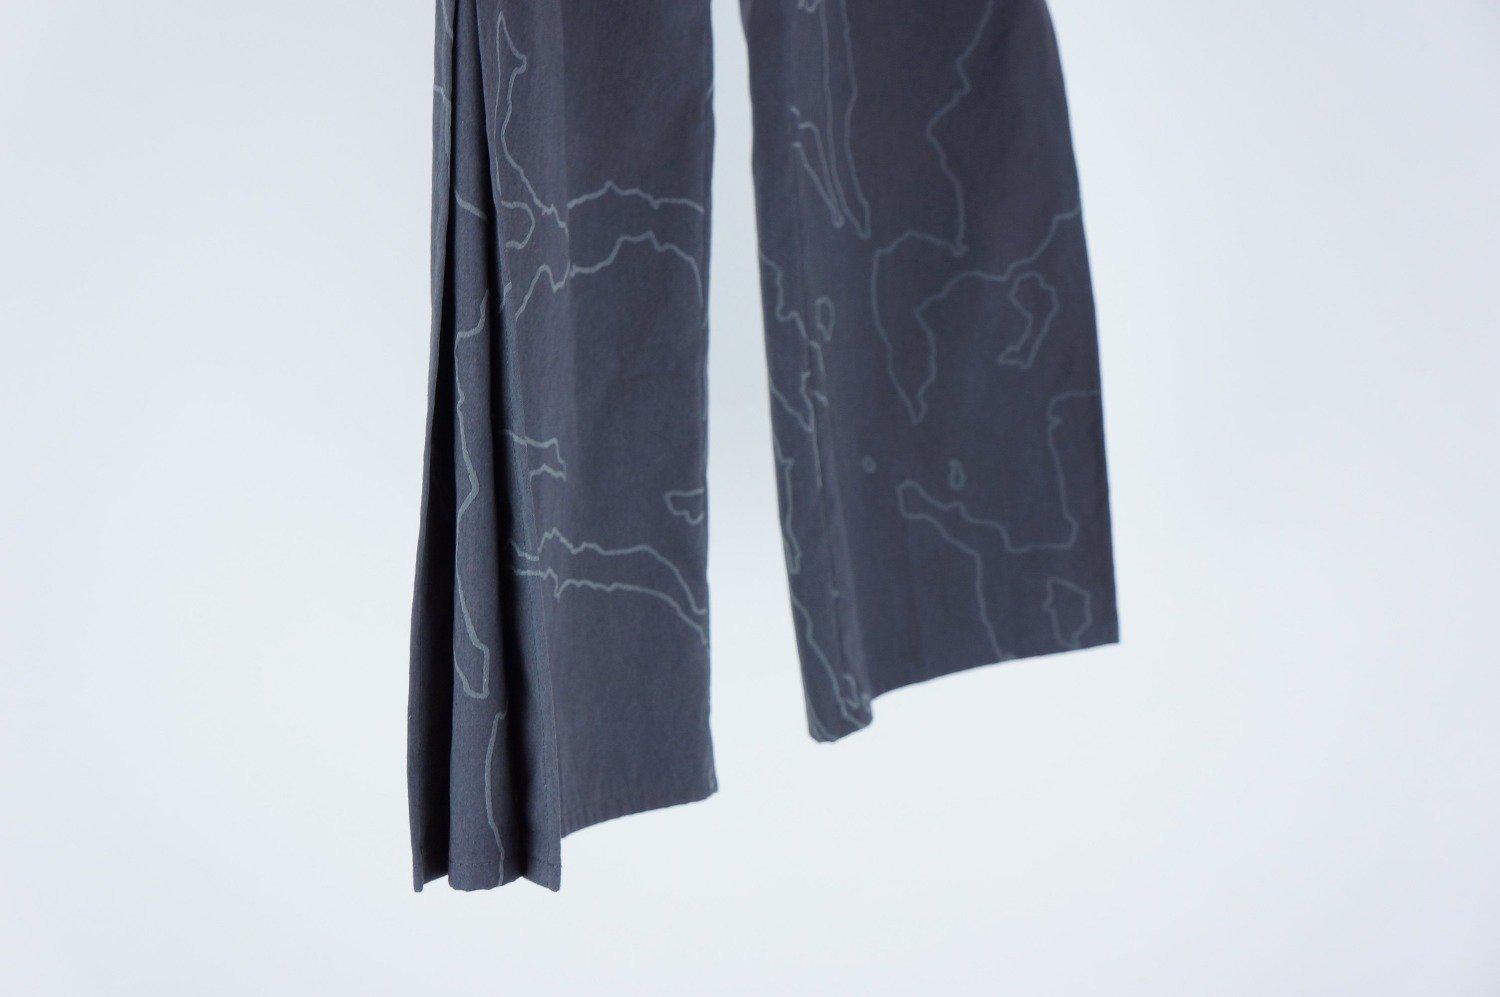 Rias Trousers / CHARCOAL